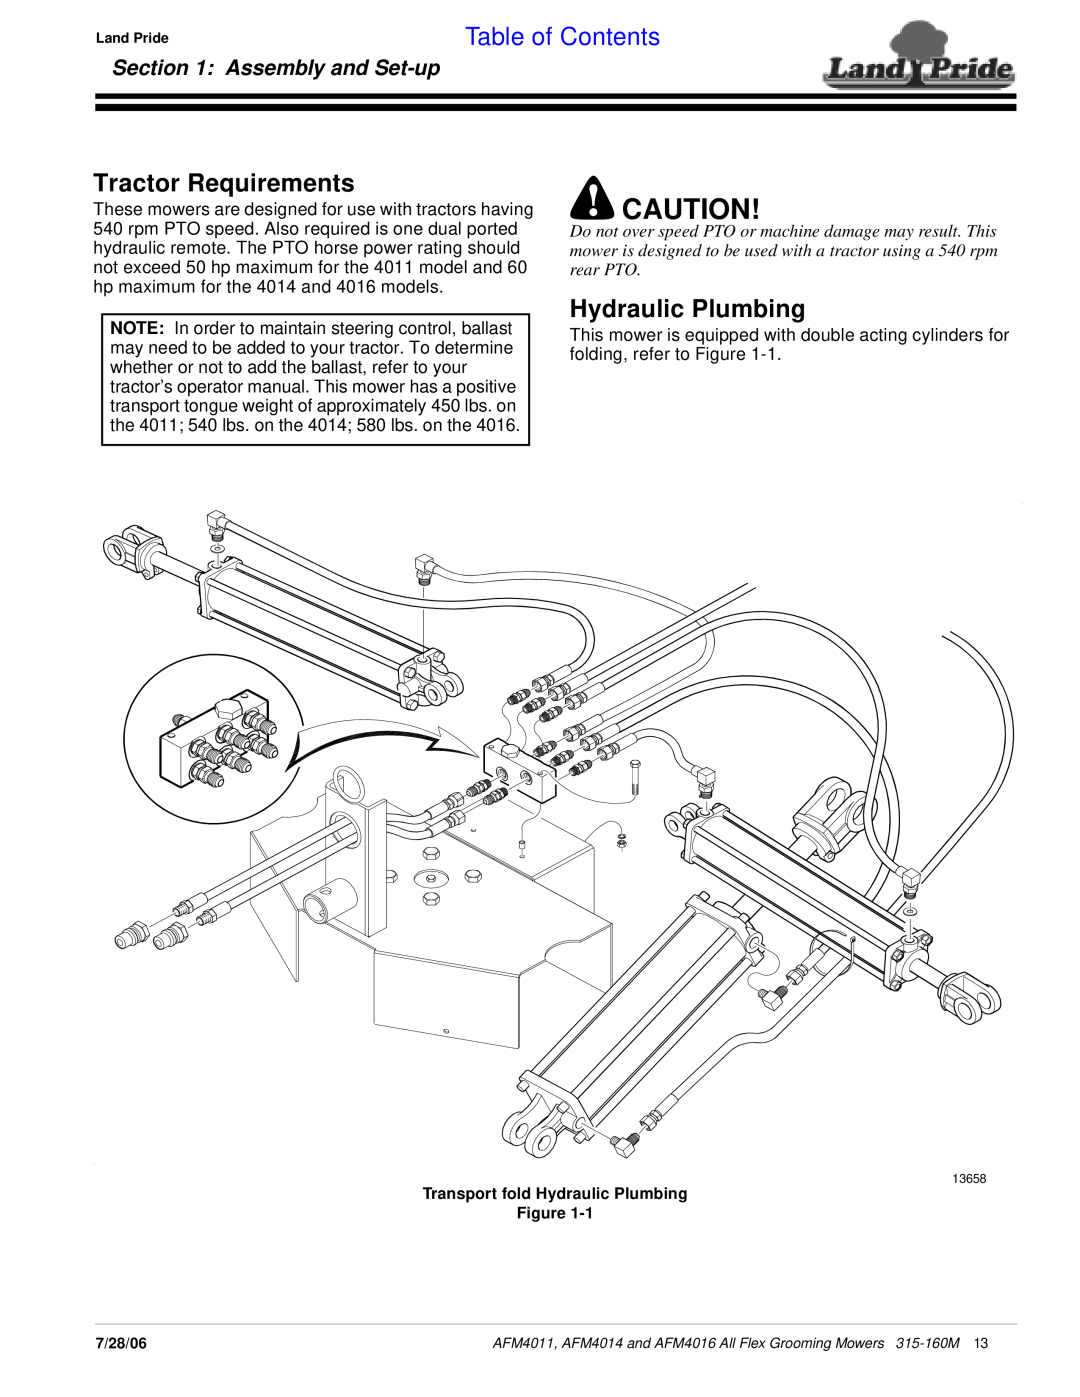 Land Pride AFM4016 manual Tractor Requirements, Hydraulic Plumbing, Table of Contents, Assembly and Set-up 